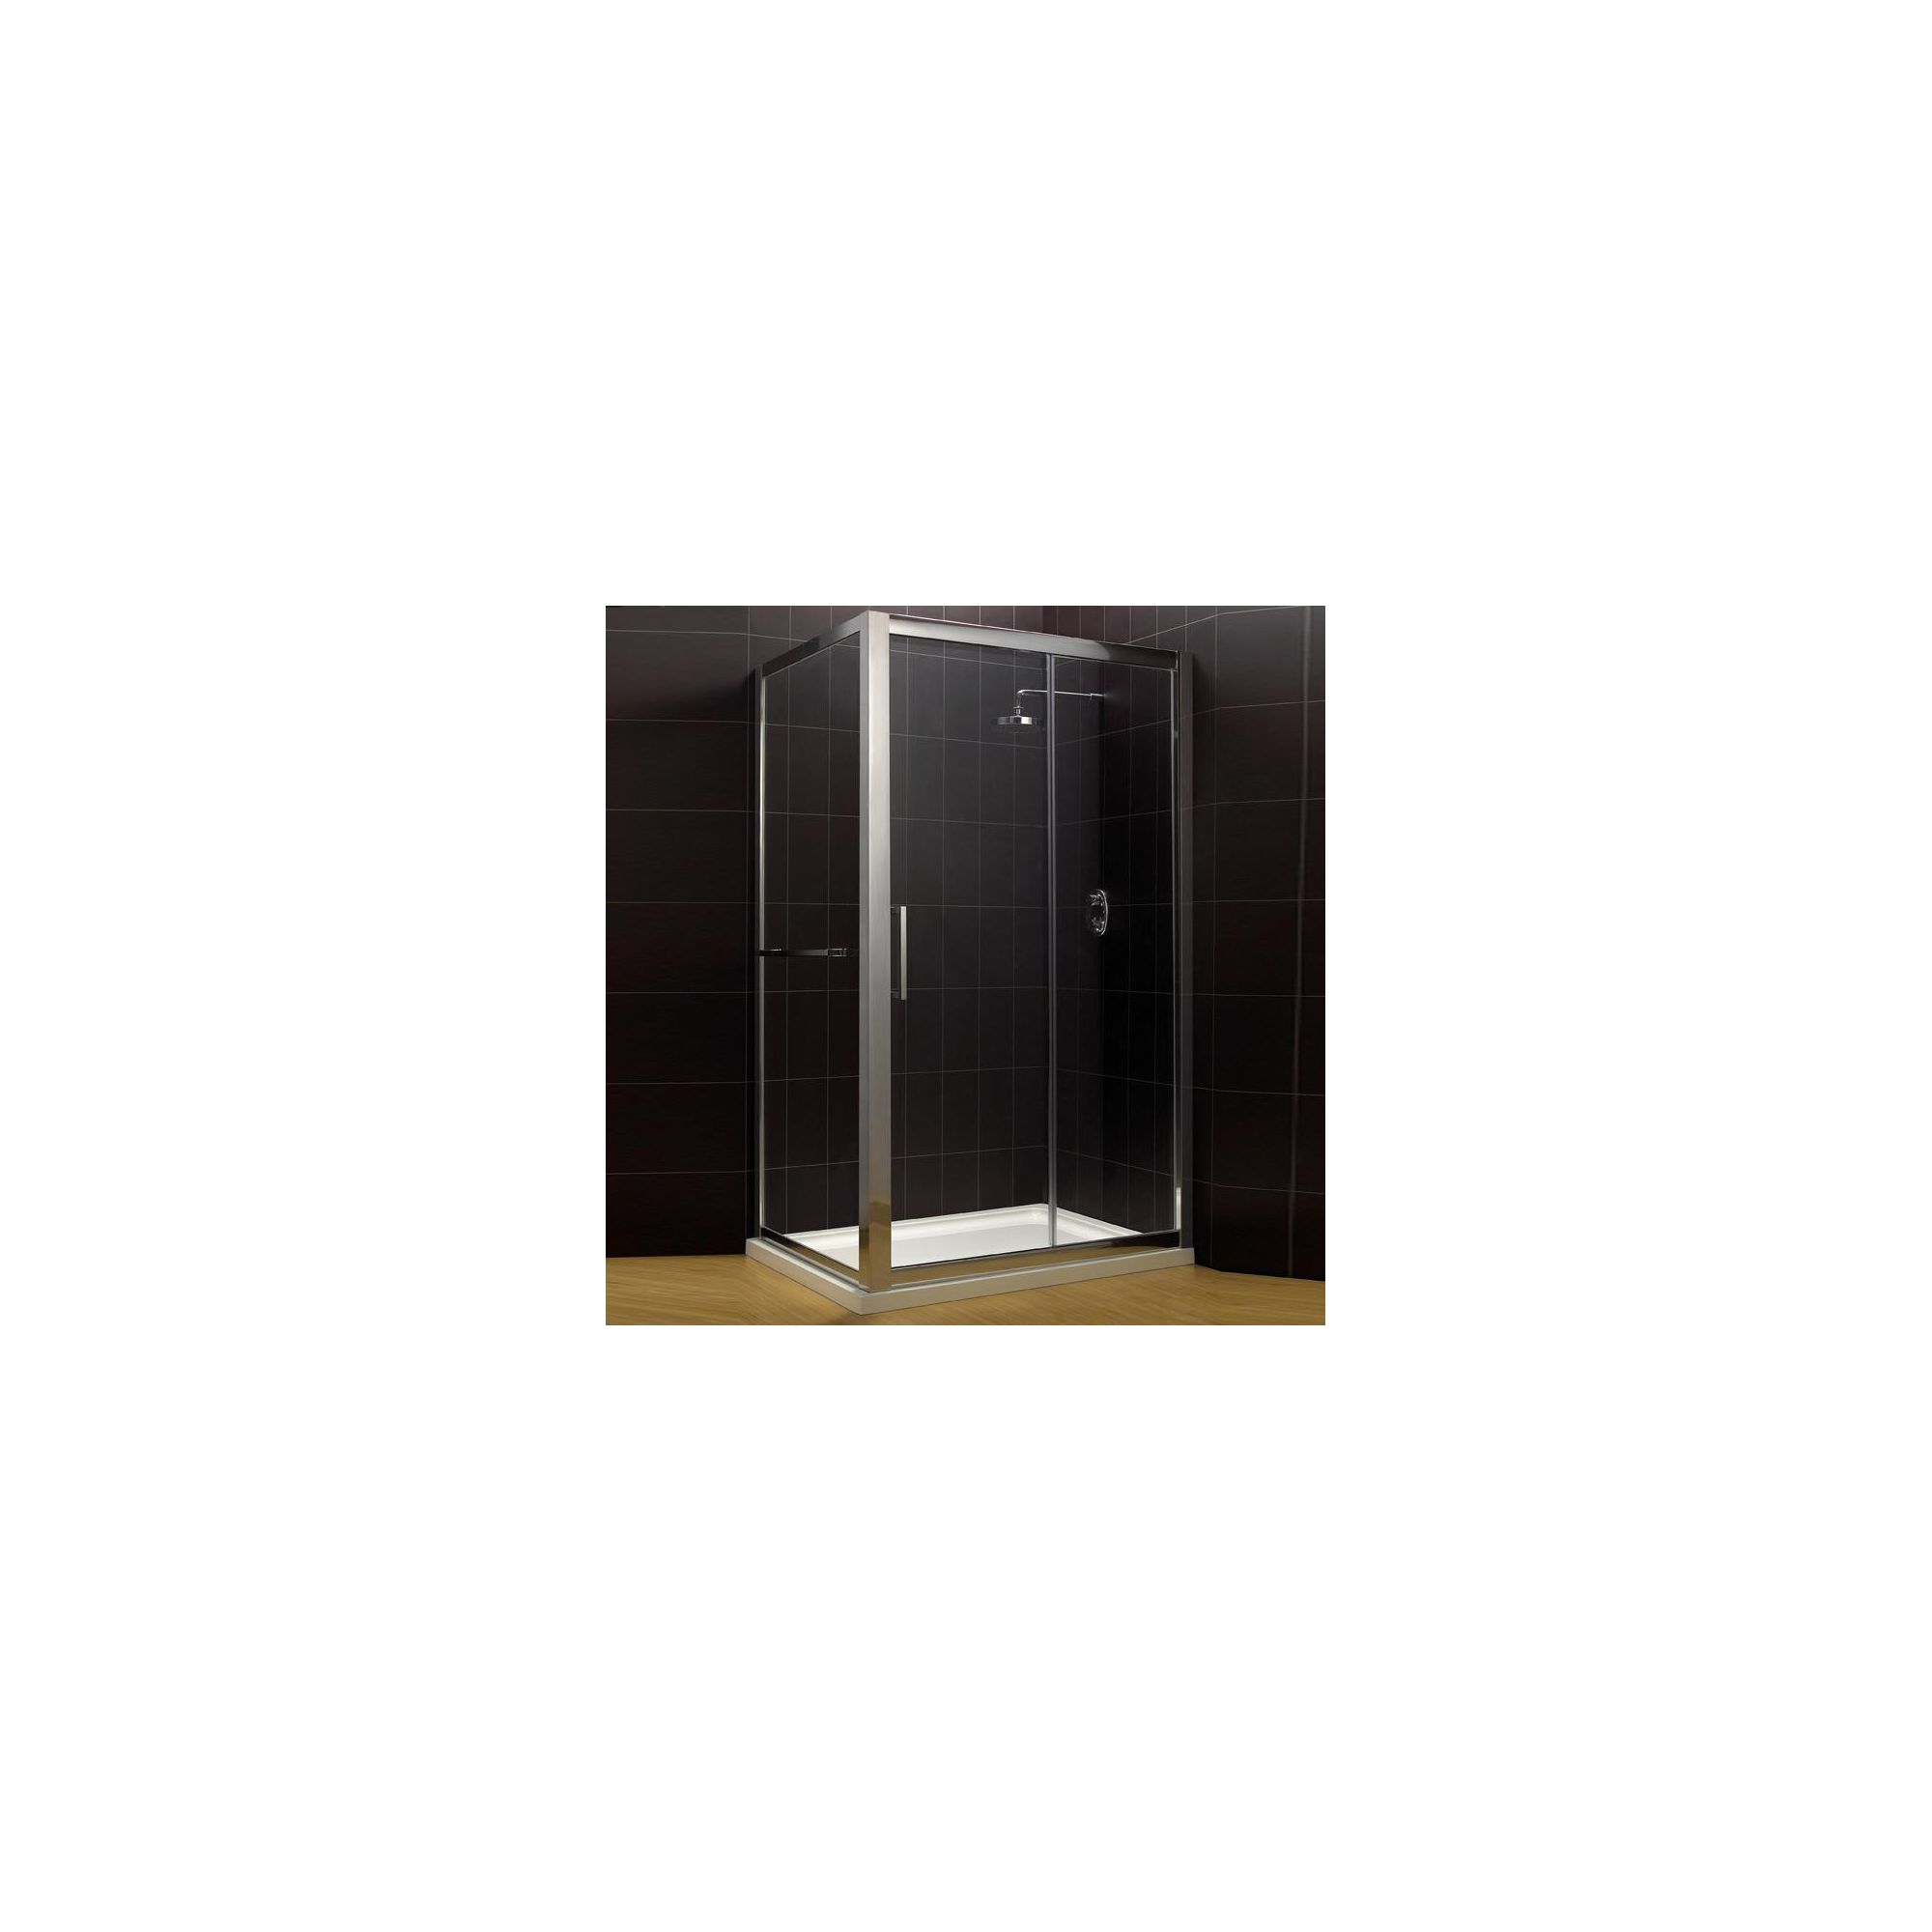 Duchy Supreme Silver Sliding Door Shower Enclosure with Towel Rail, 1100mm x 900mm, Standard Tray, 8mm Glass at Tesco Direct